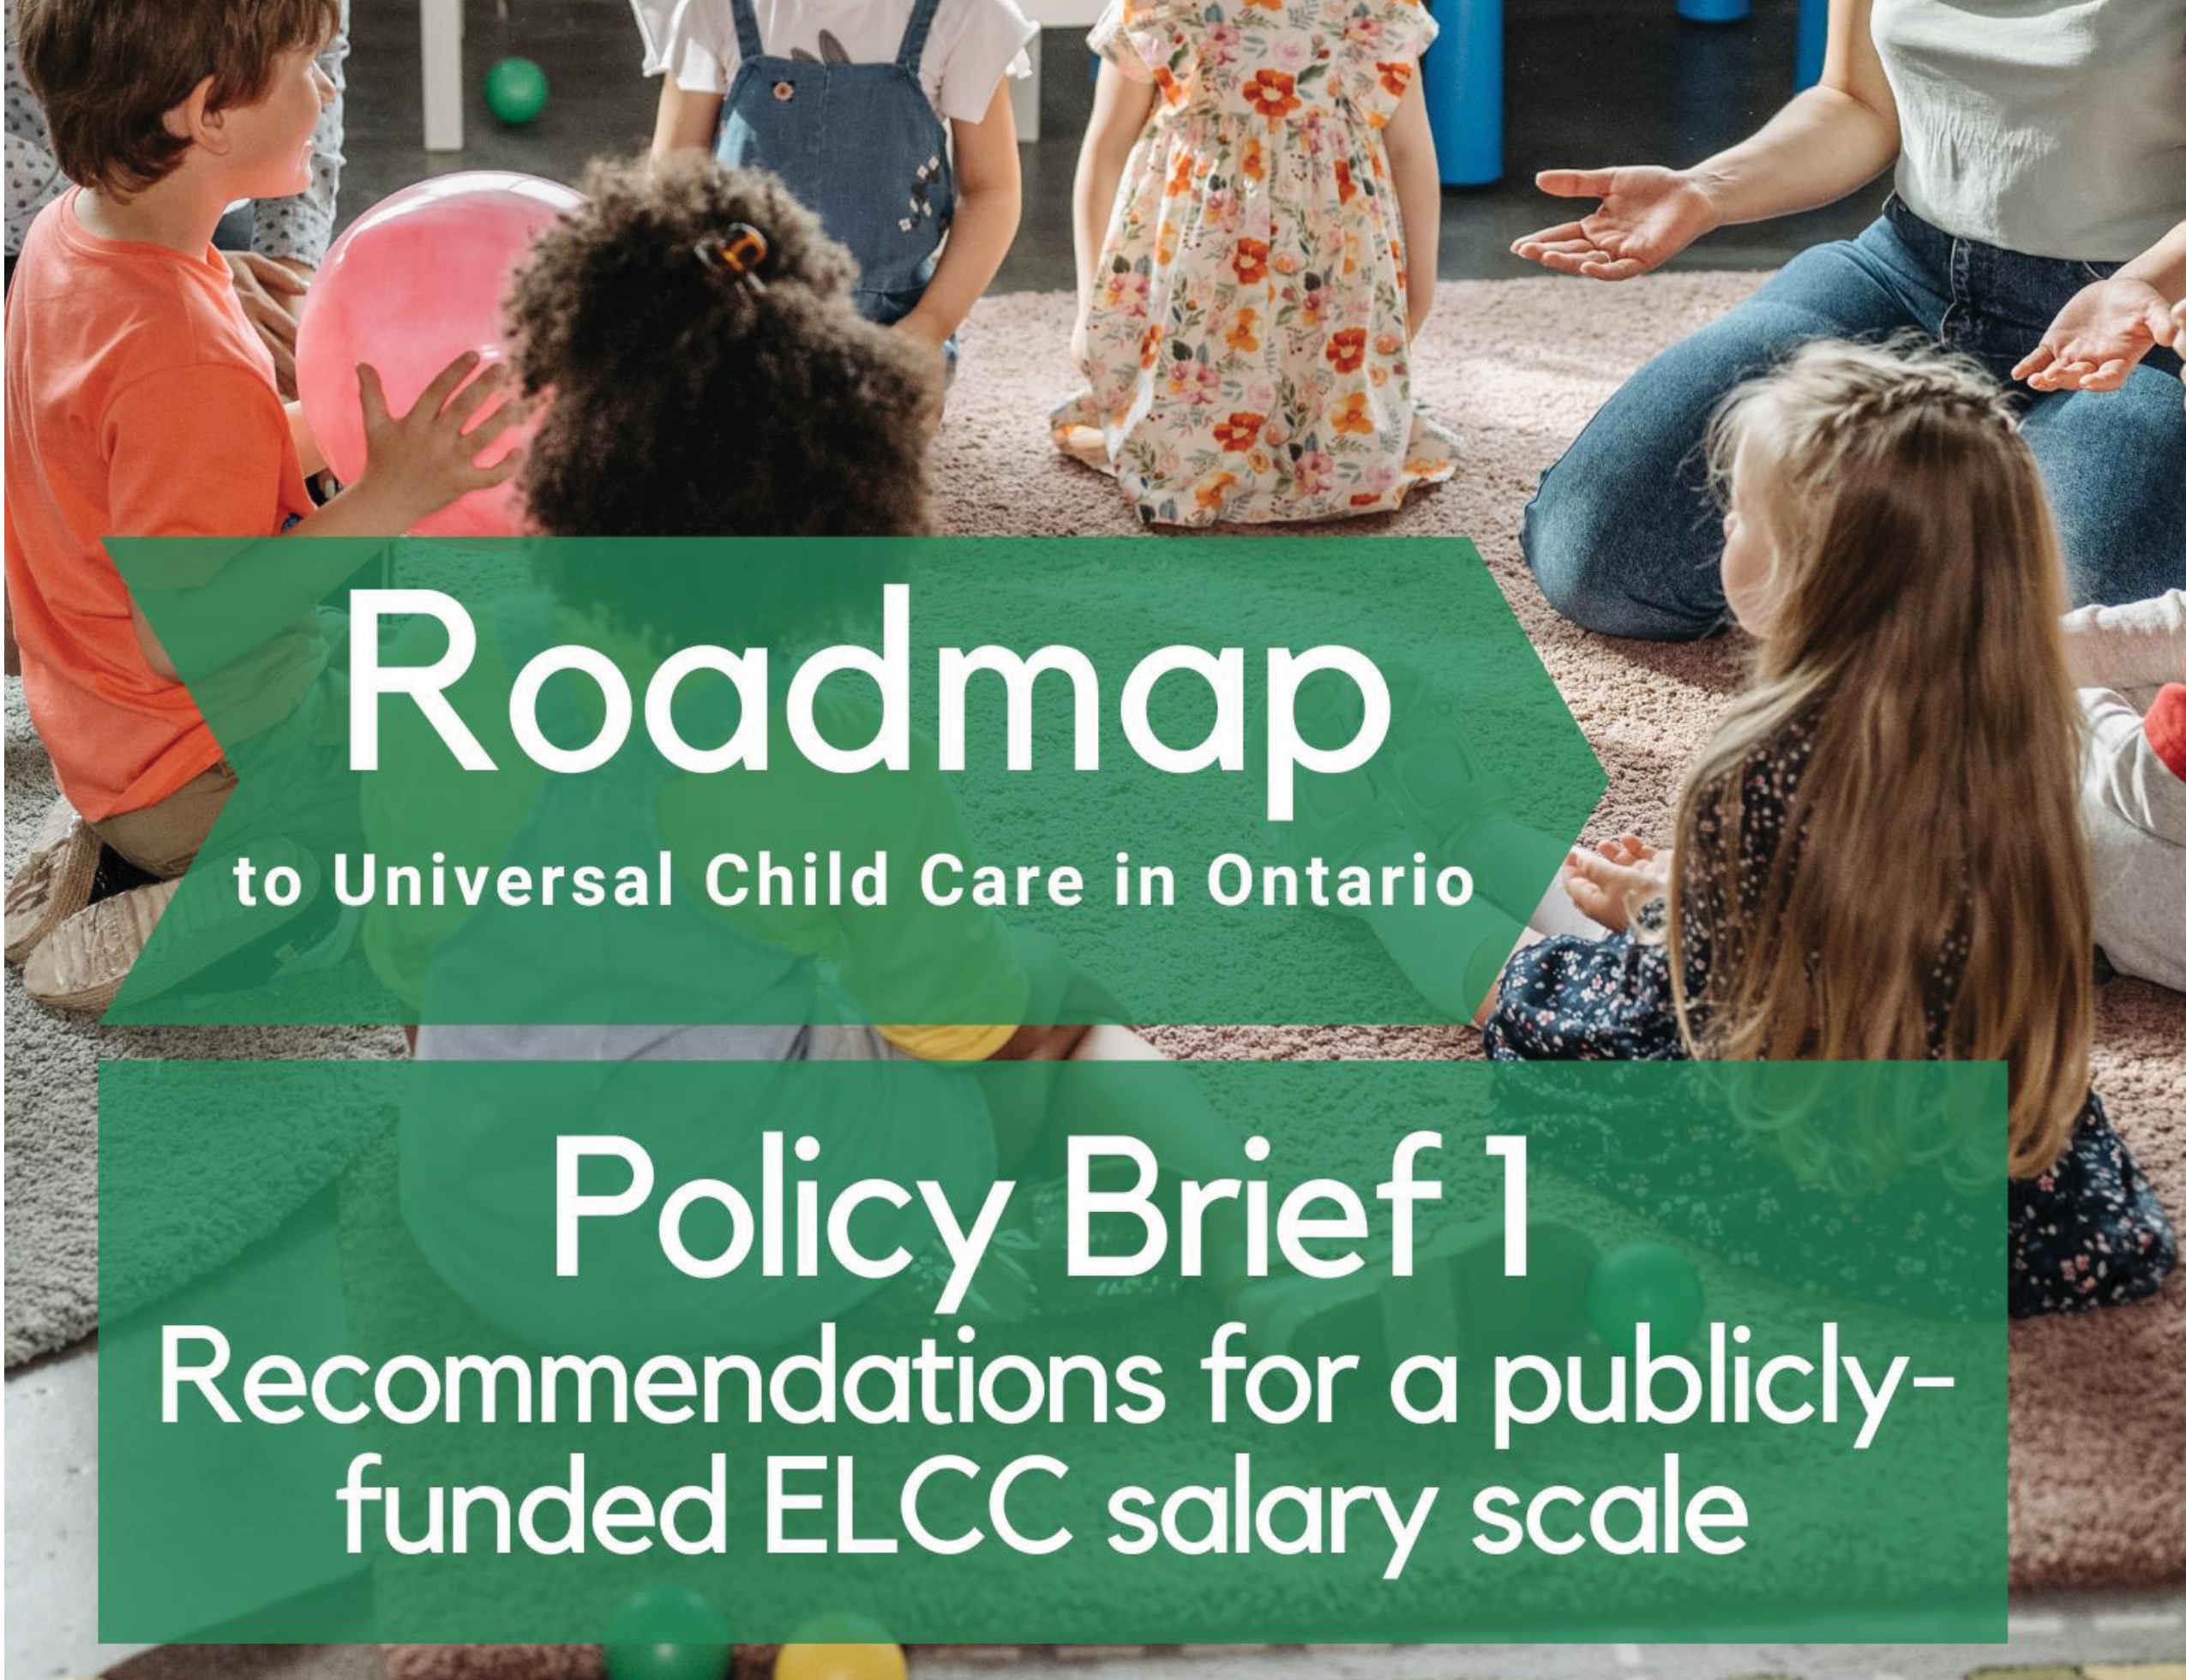 Portion of the cover of the publication "Policy Brief 1: Recommendations for a publicly funded ELCC salary scale"